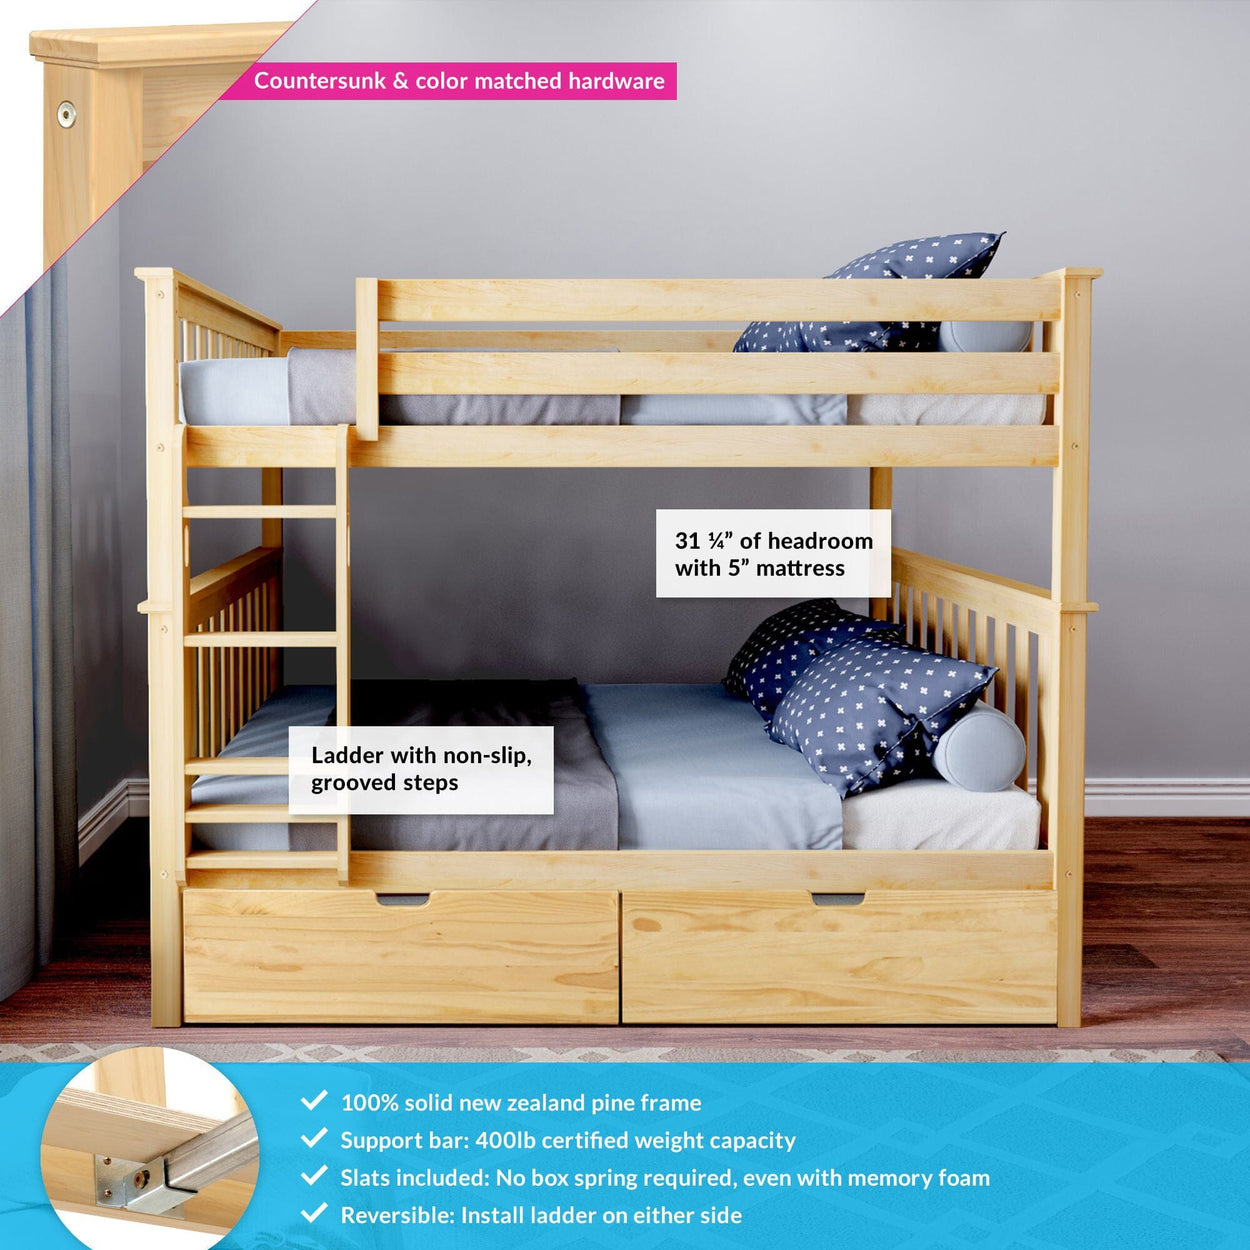 187251-001 : Bunk Beds Full Over Full Bunk Bed With Storage Drawers, Natural